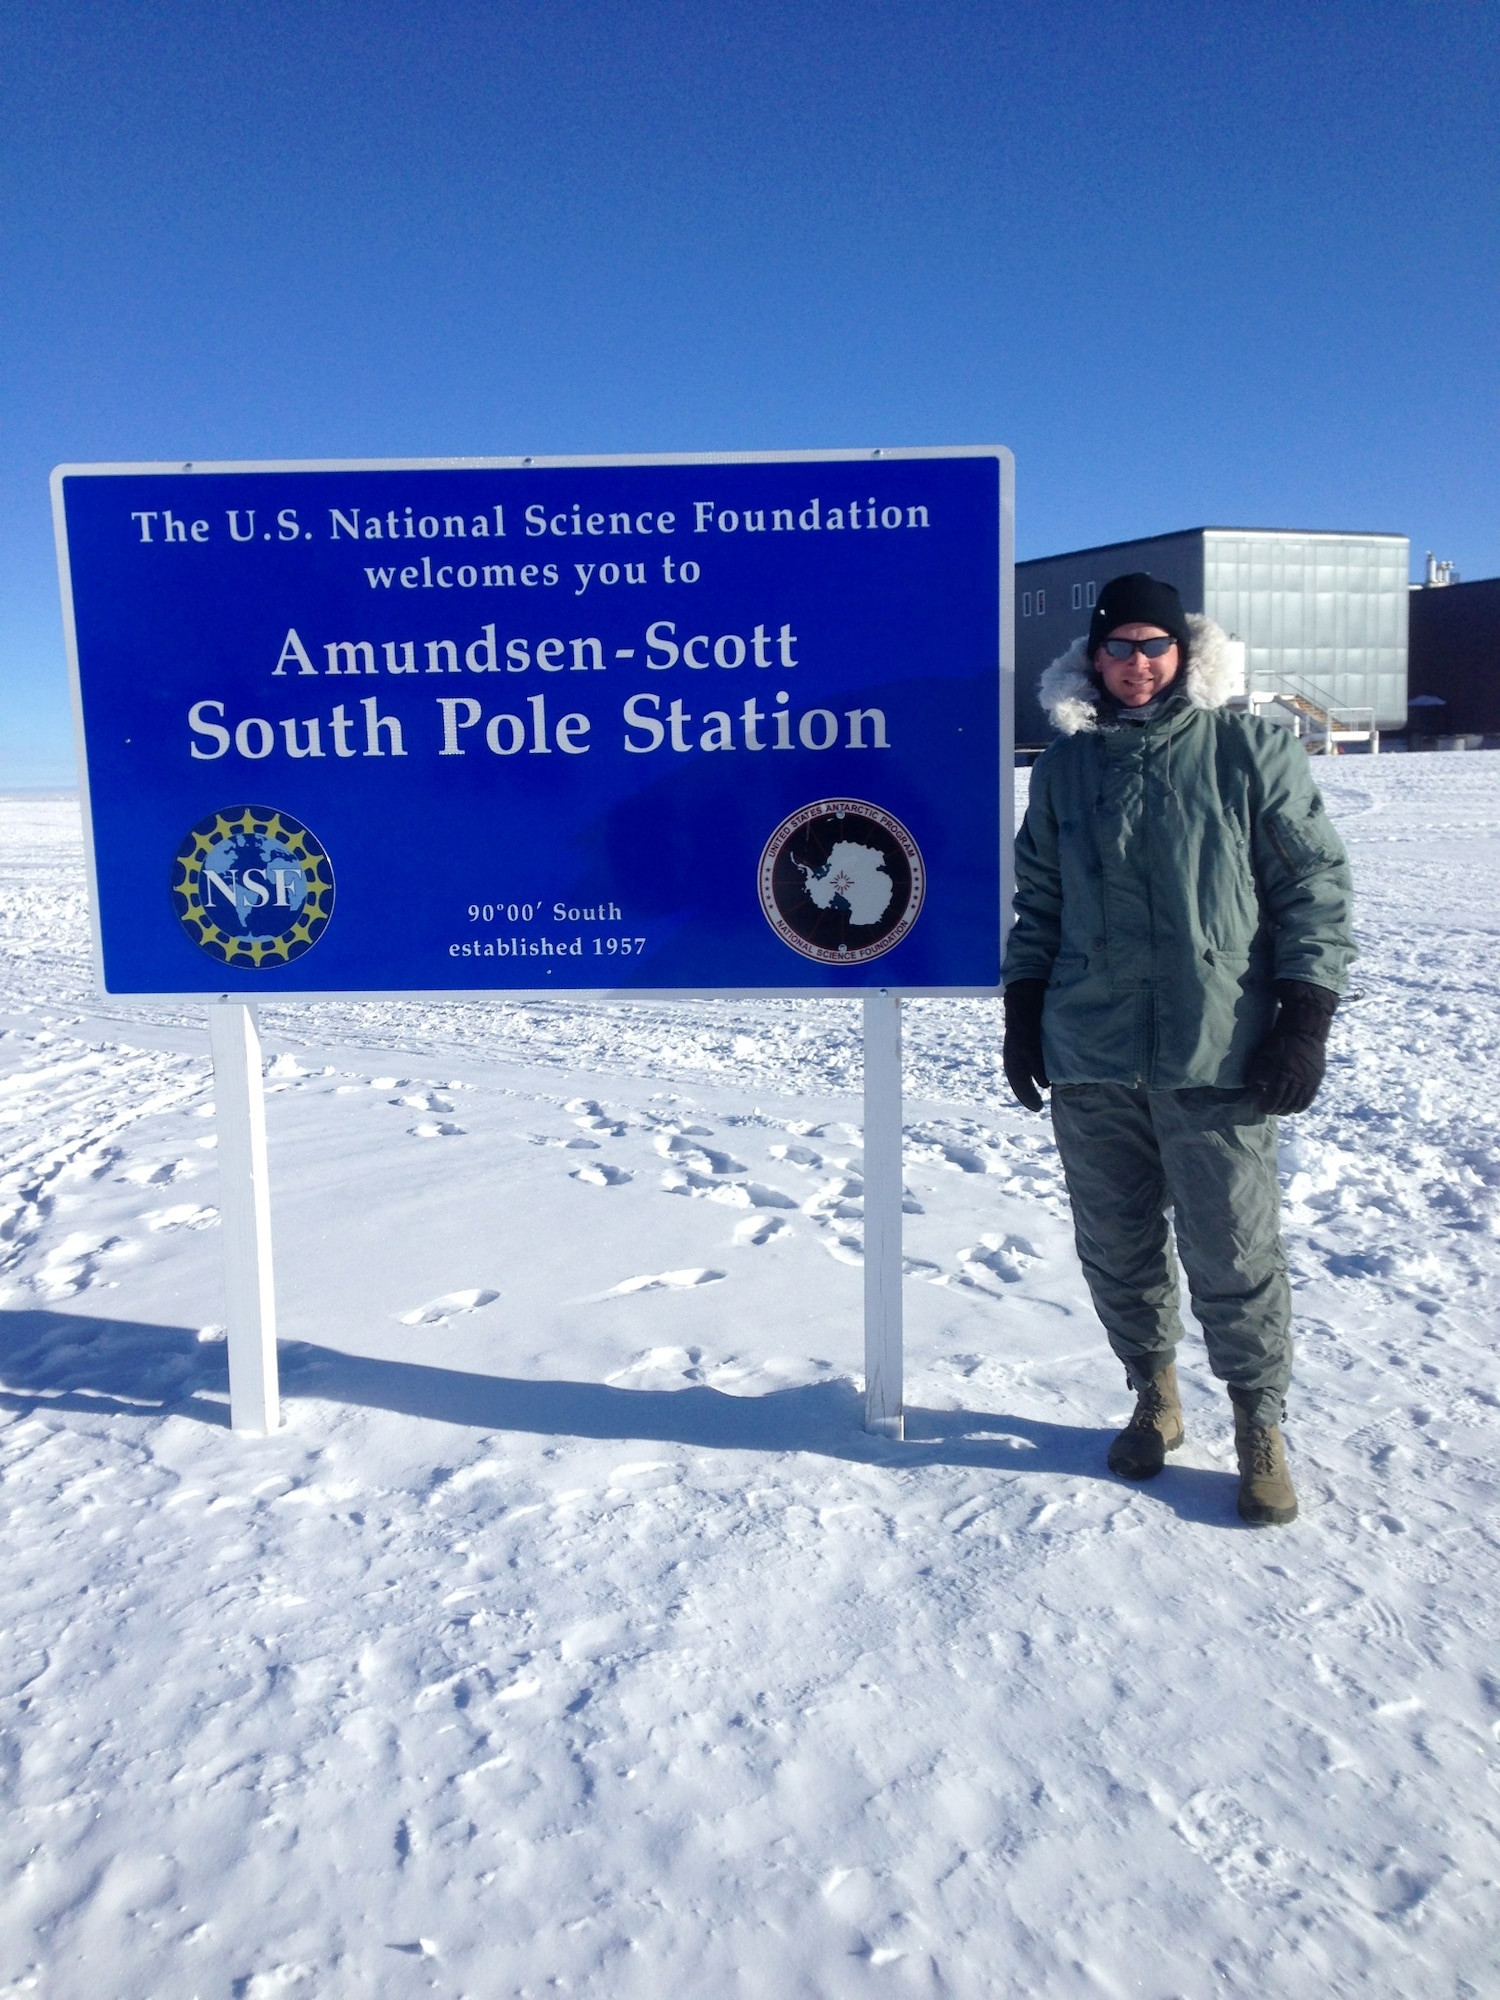 SOUTH POLE --Senior Master Sgt. Trey Hamm arrives here at the Amundsen-Scott South Pole station in February 2014 where the temperature was minus 40 degrees Fahrenheit, with a minus 70 degree wind chill. Hamm was deployed to the National Science Foundation’s McMurdo Station in Antarctica as the Joint Ground Safety Manager for the Air Force and the Navy.